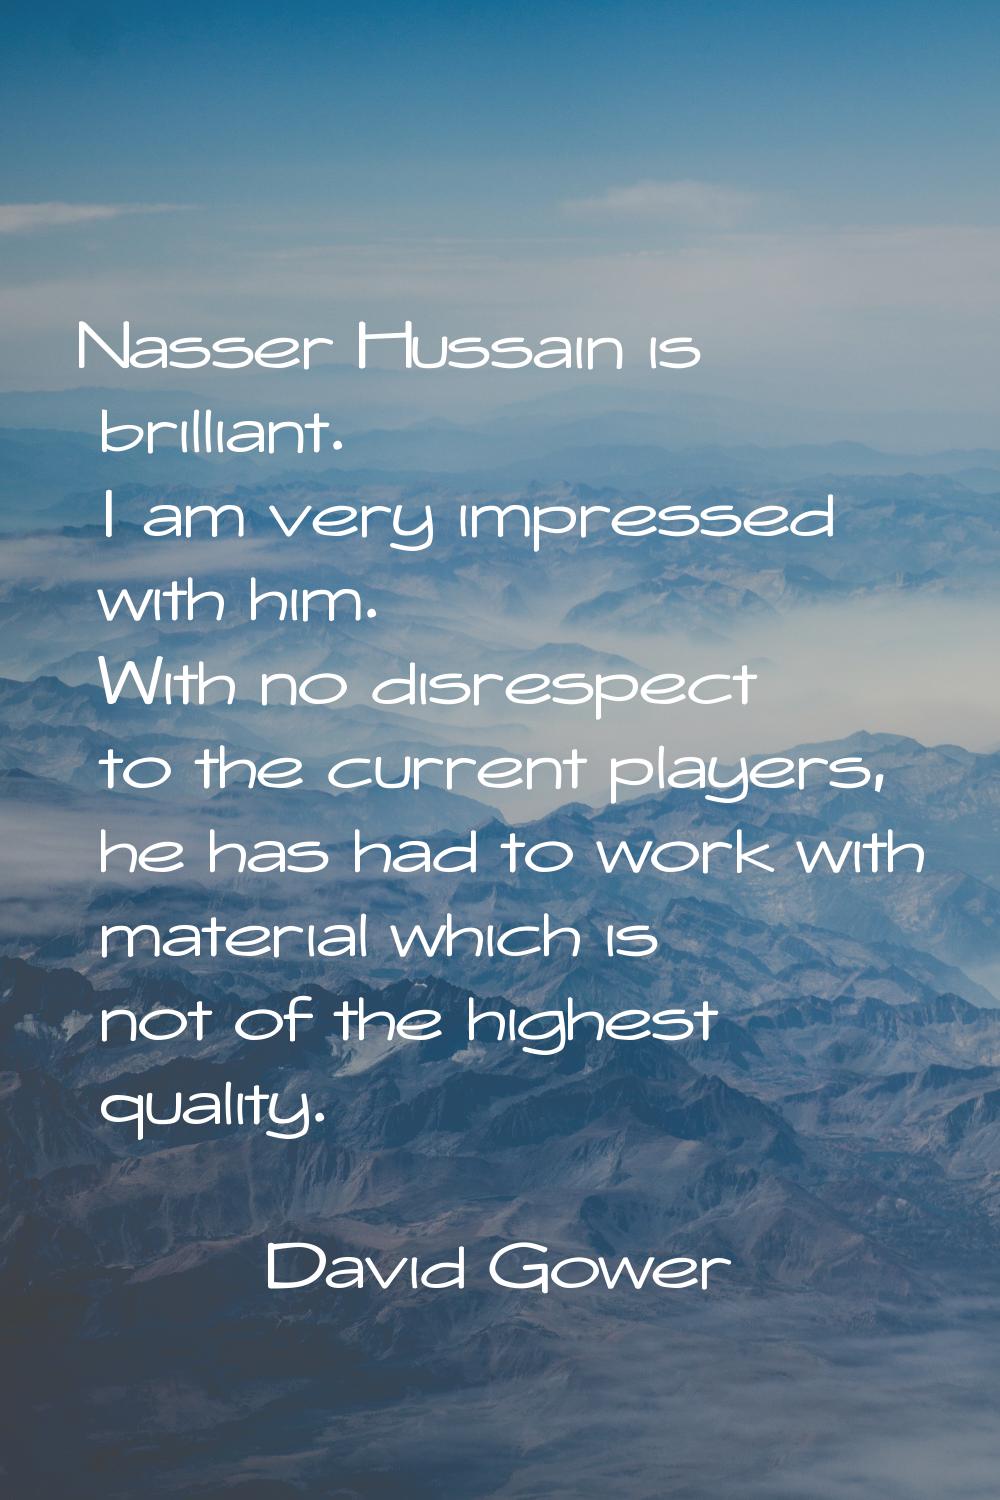 Nasser Hussain is brilliant. I am very impressed with him. With no disrespect to the current player